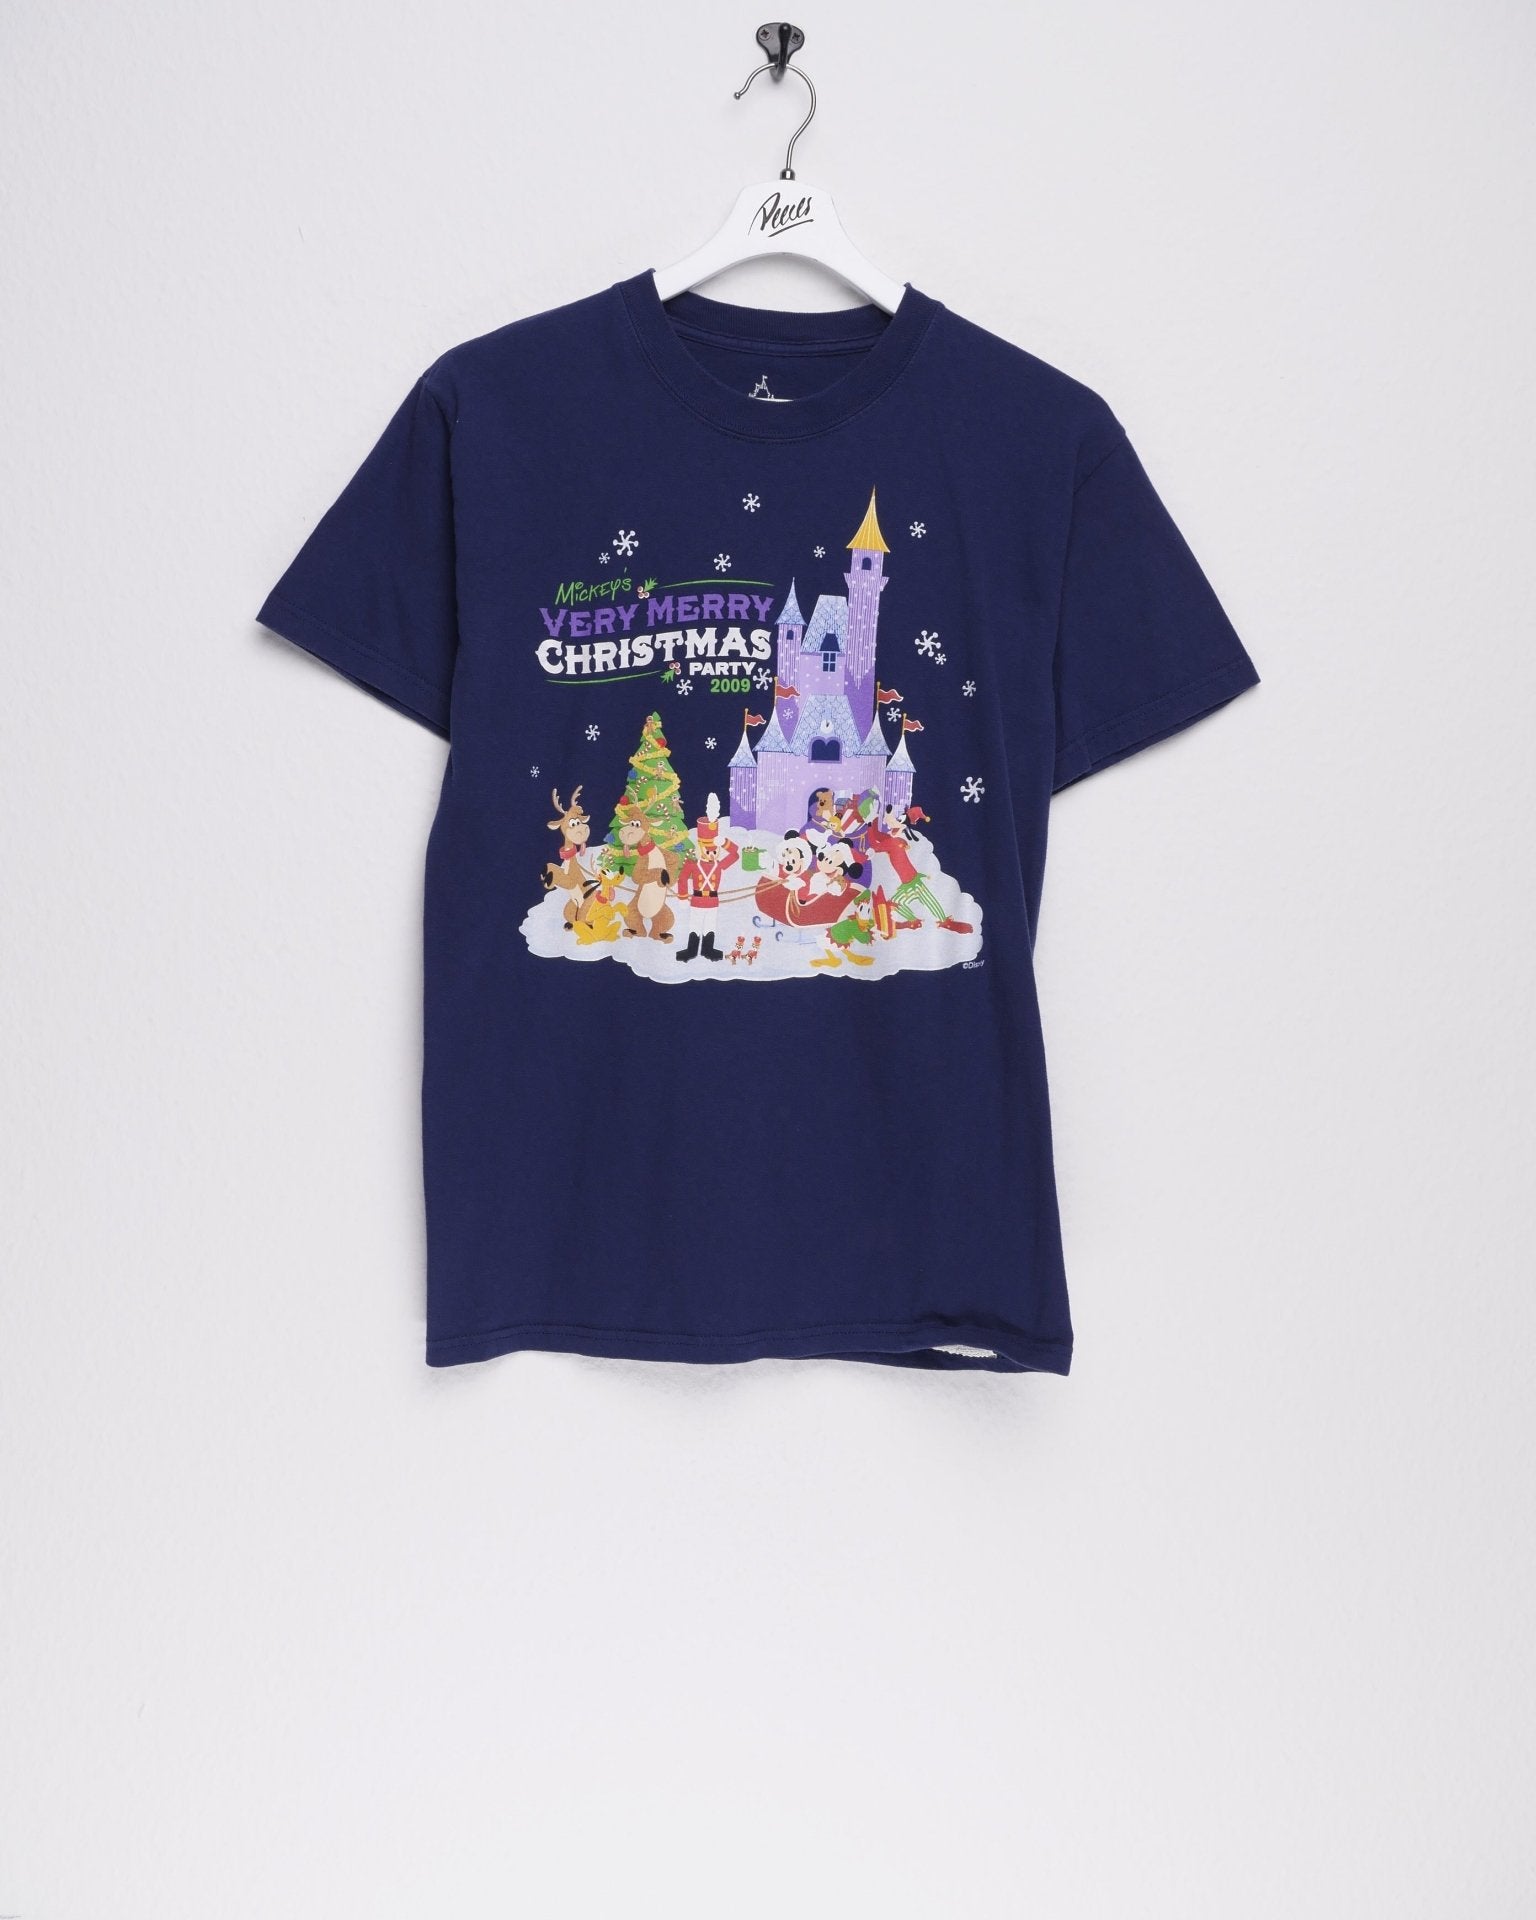 Disney Mickey's Very Merry Christmas Party 2009 printed Graphic Shirt - Peeces